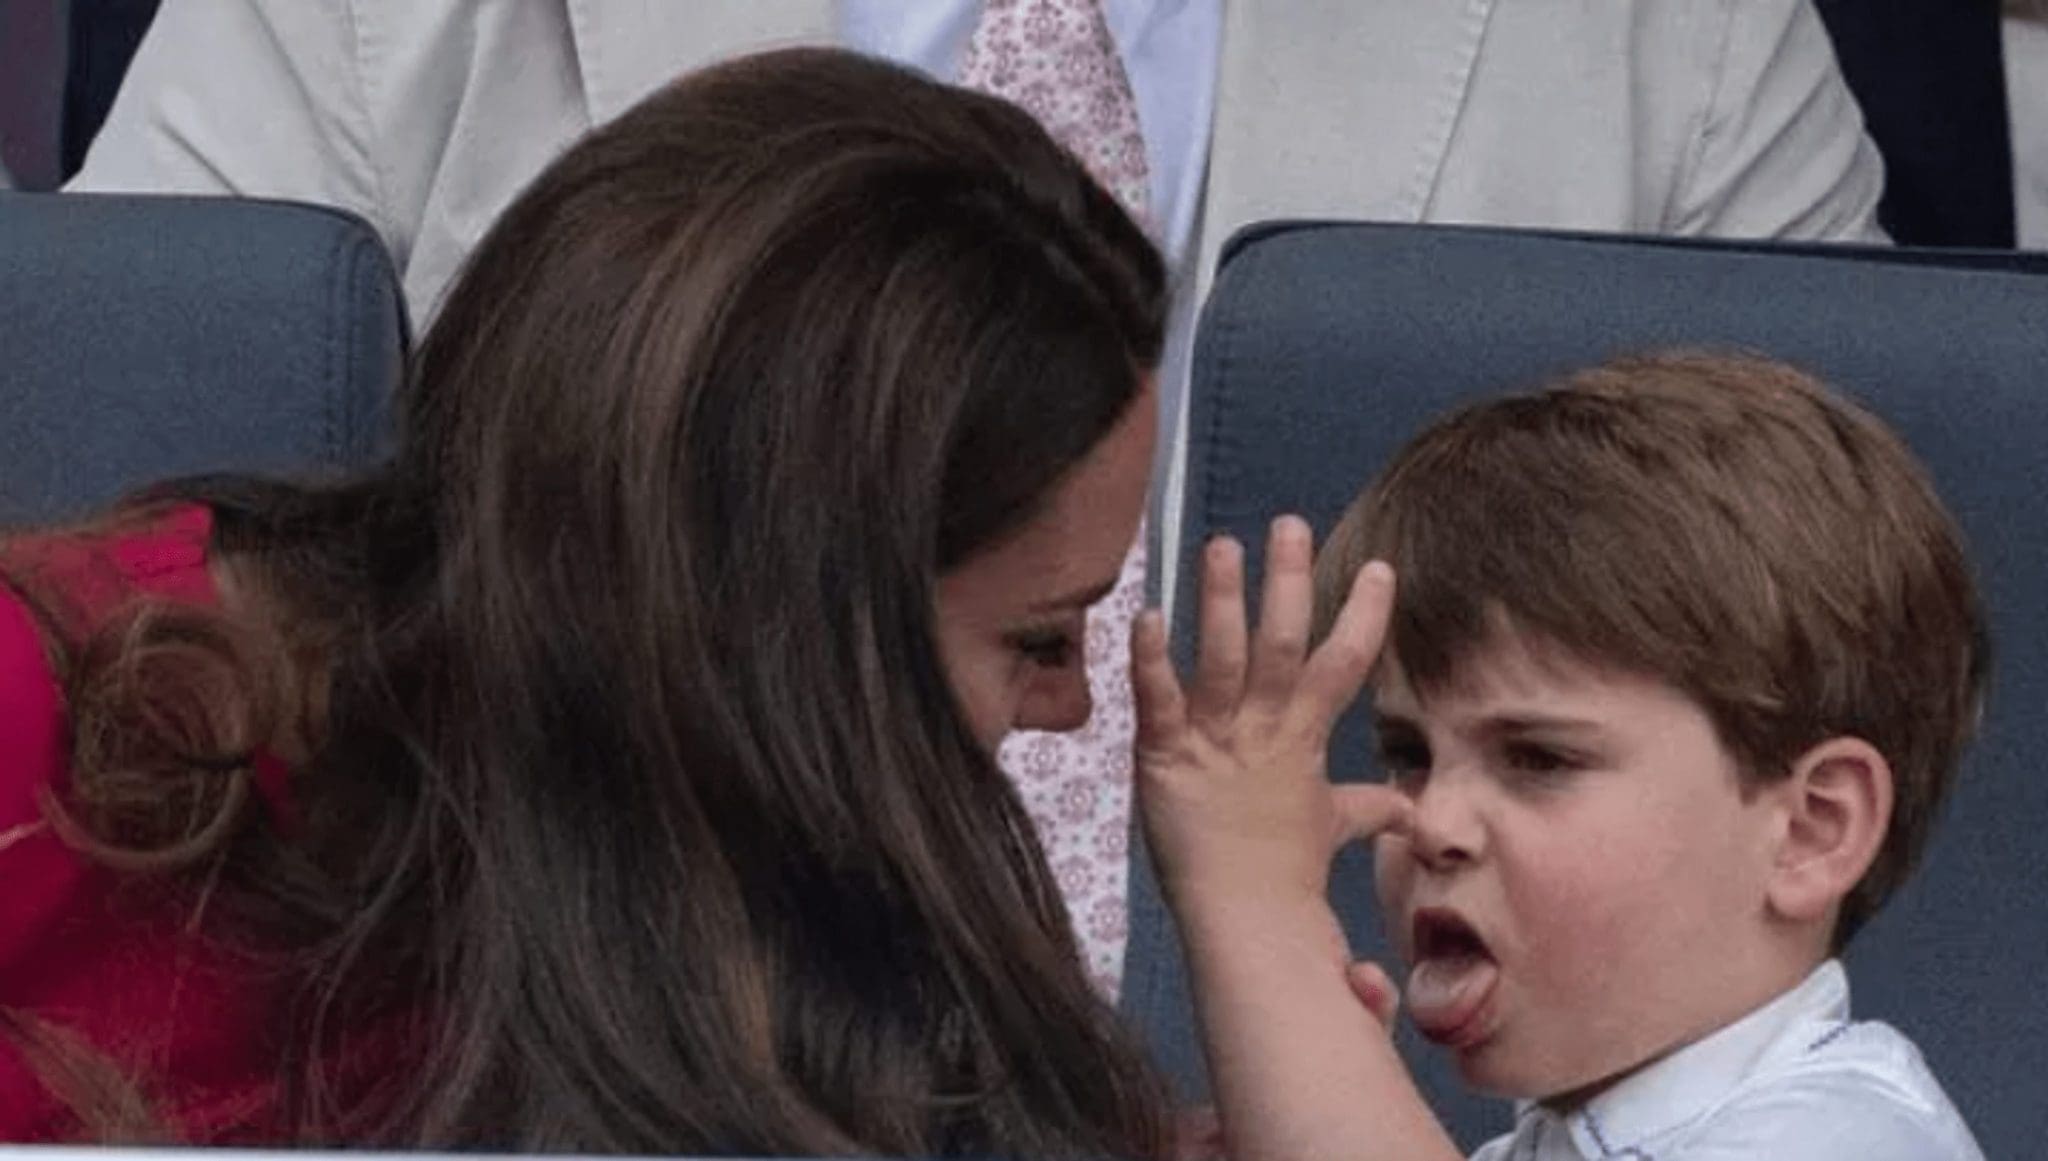 Why does everyone love funny photos of Kate Middleton and naughty Prince Louis so much